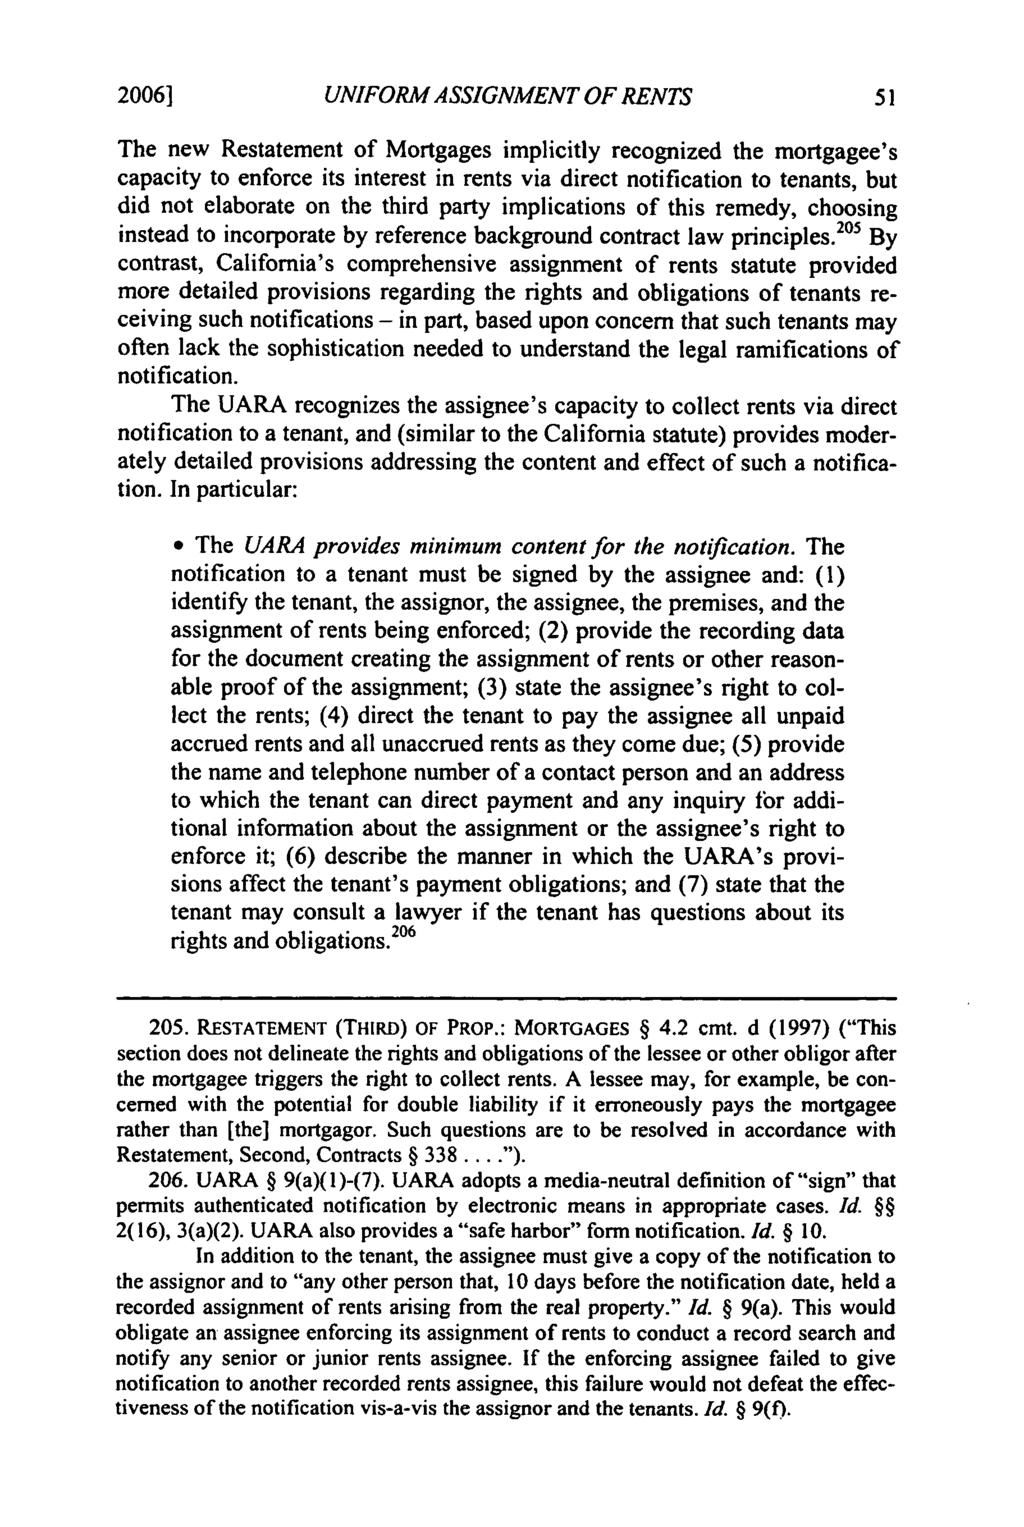 2006] Freyermuth: Freyermuth: Modernizing Security in Rents UNIFORM ASSIGNMENT OF RENTS The new Restatement of Mortgages implicitly recognized the mortgagee's capacity to enforce its interest in